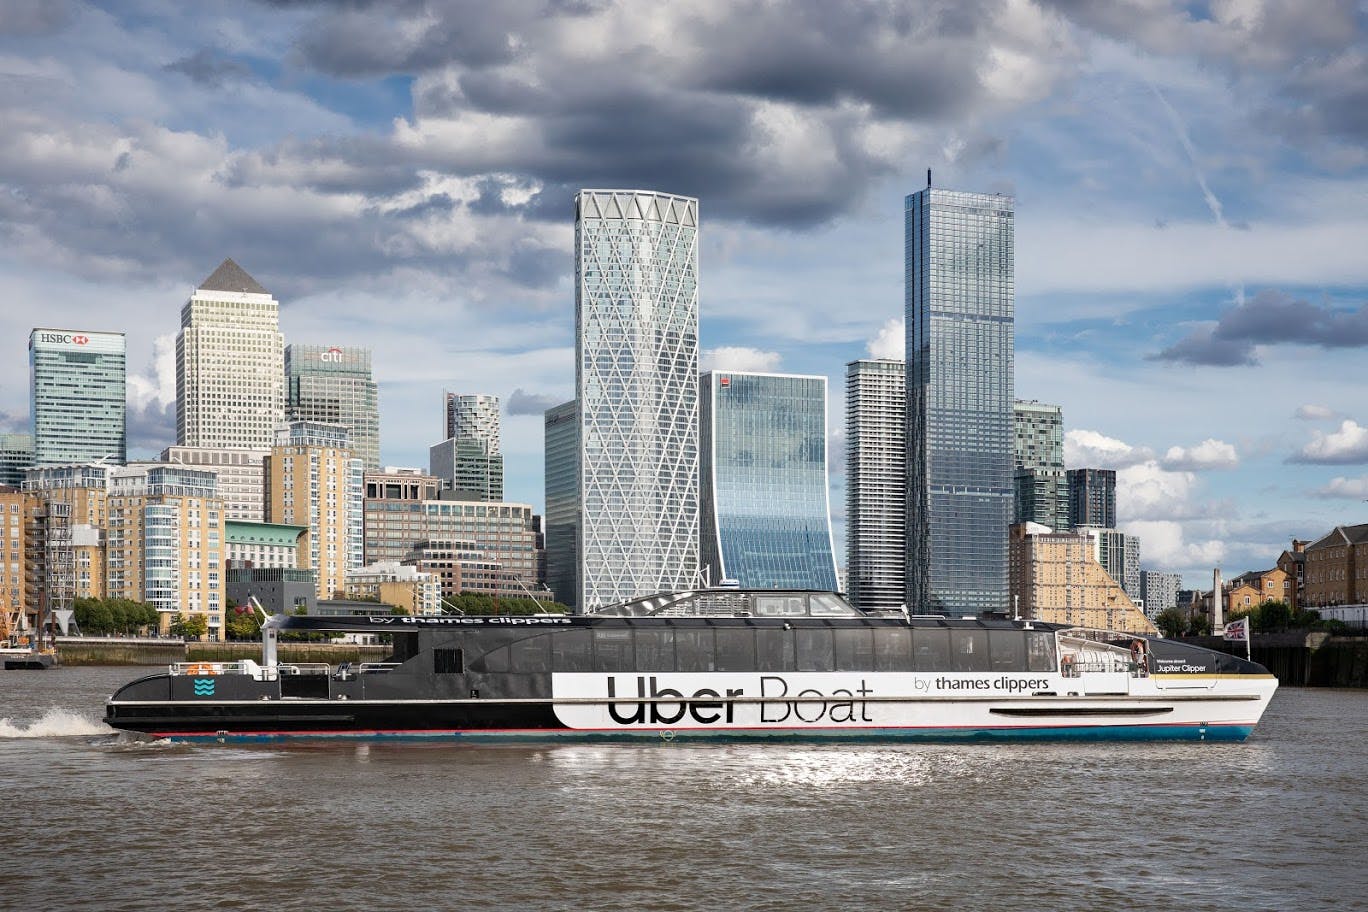 Uber Boat by Thames Clippers one way ticket Musement